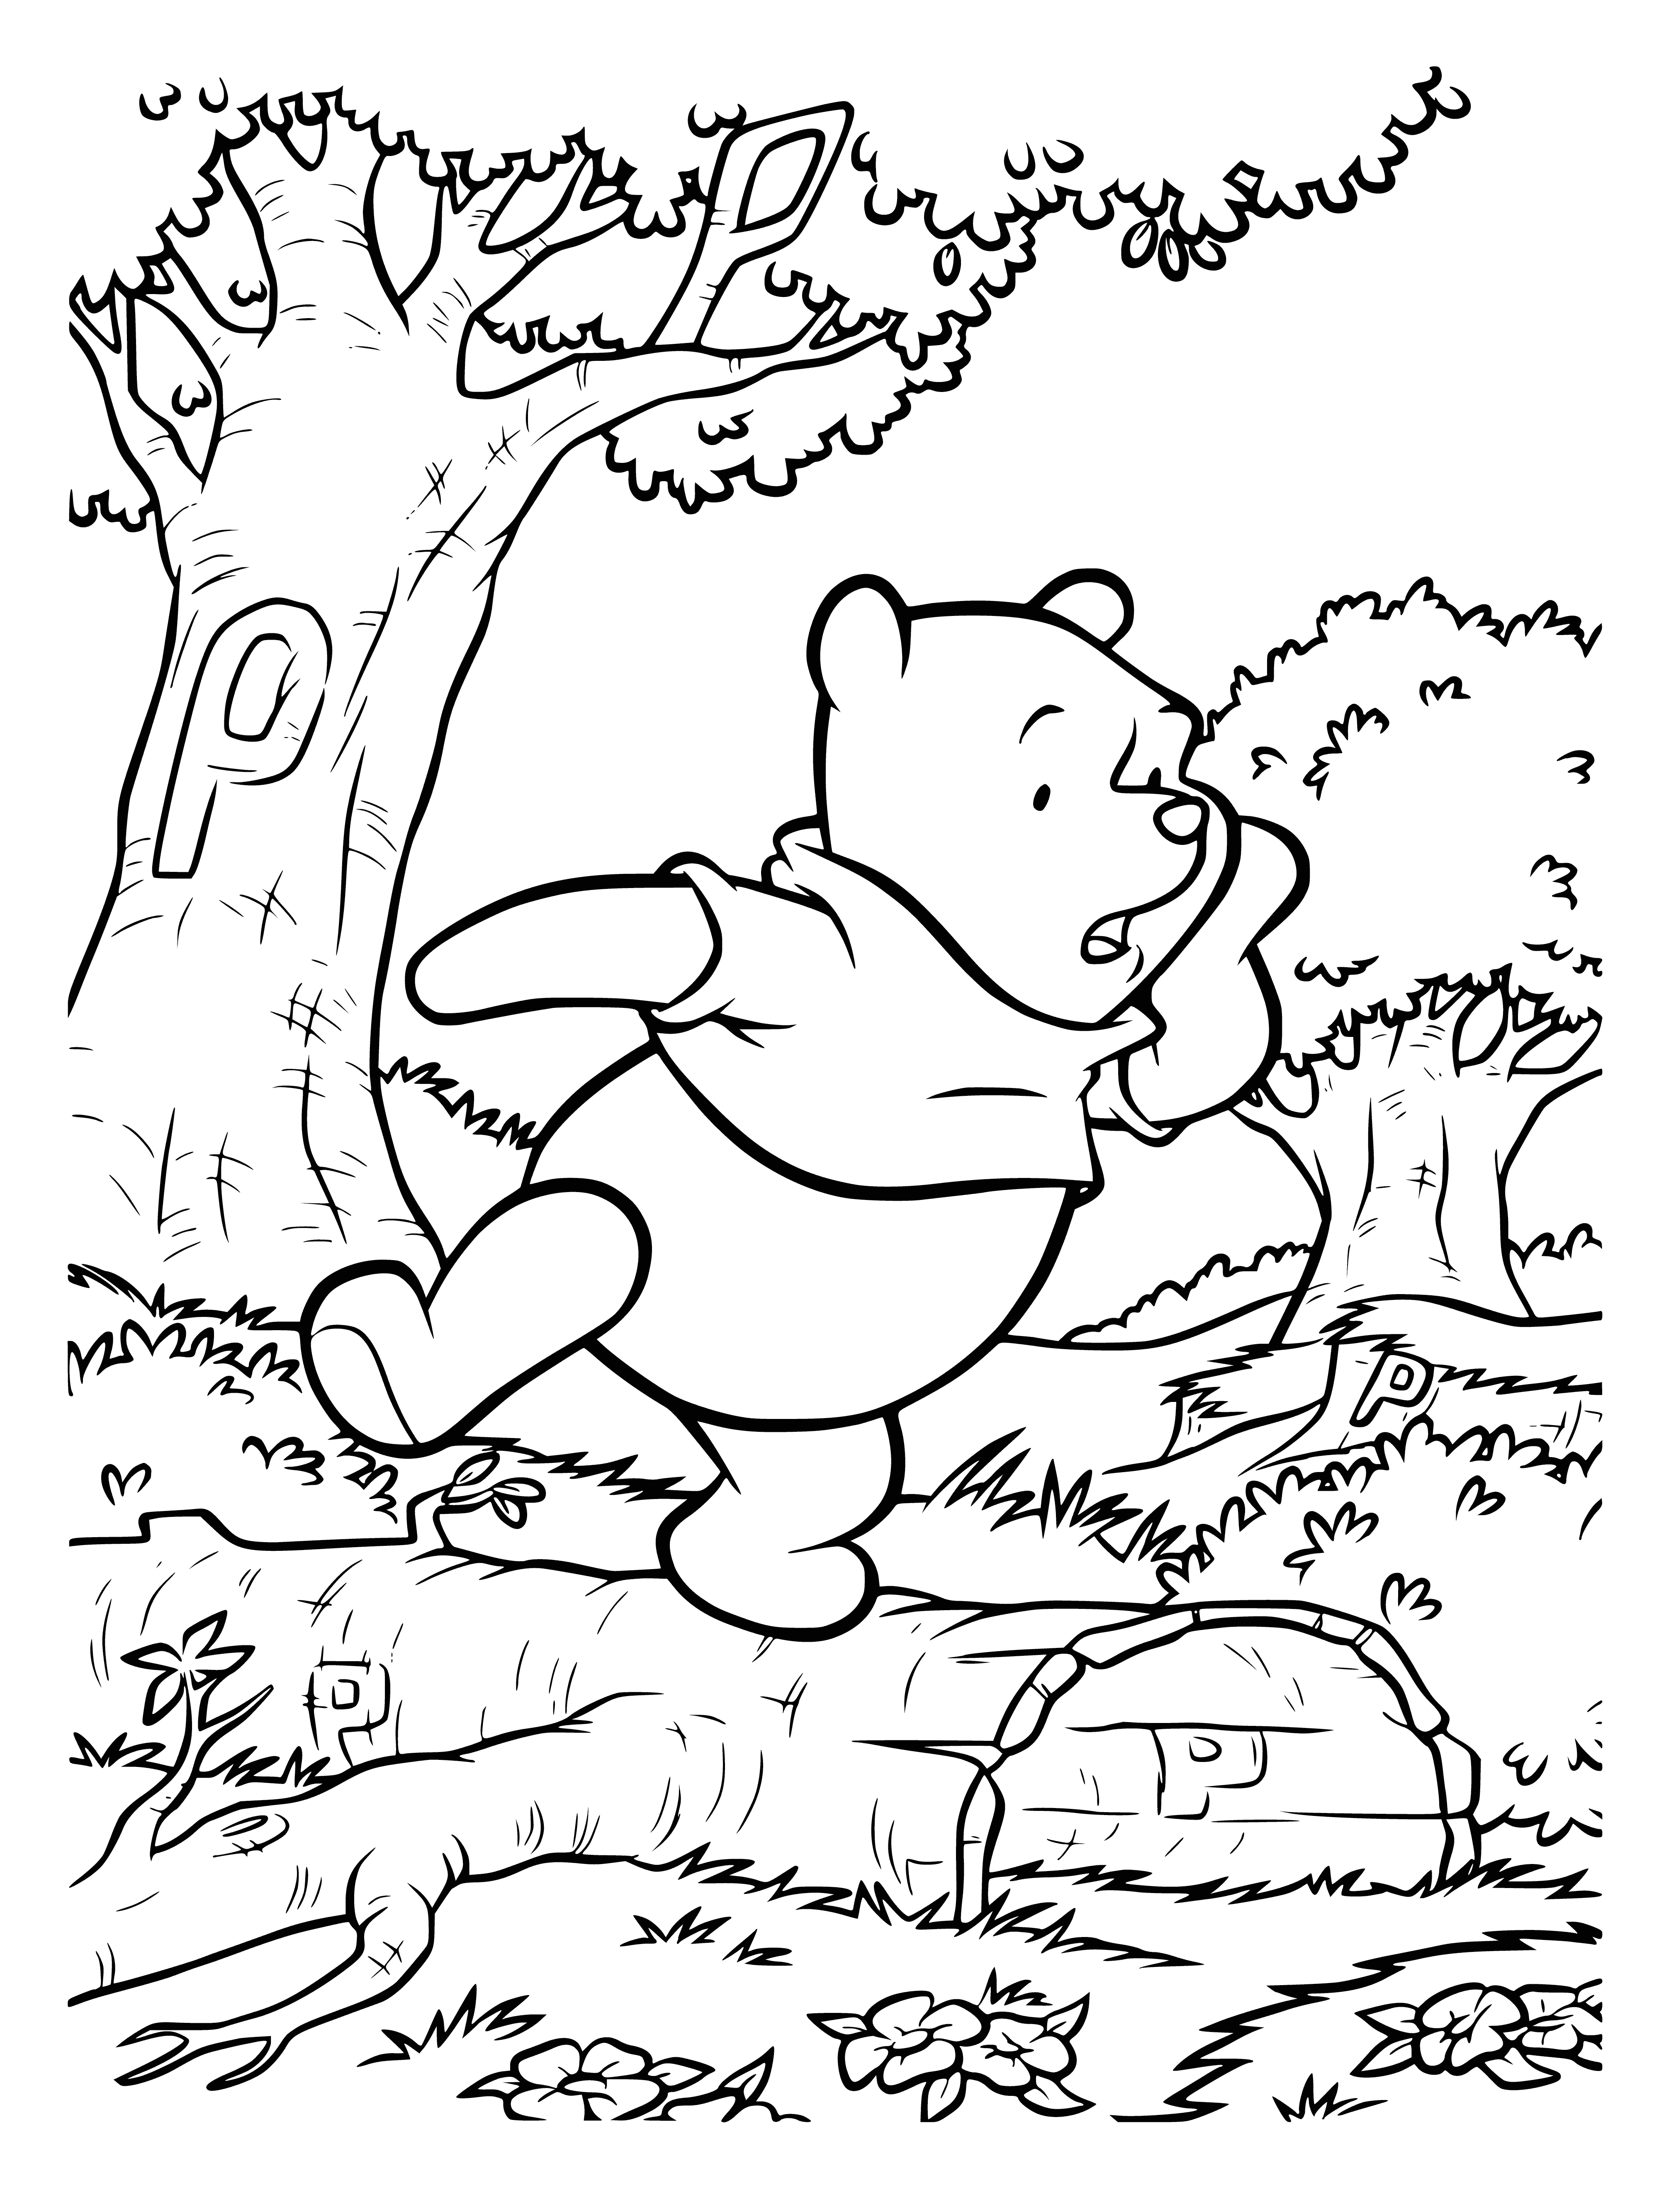 coloring page: A brown bear wearing a red shirt w/black necktie stands on hind legs, holding a yellow honey pot. A red bird looks on, next to a large, green tree.